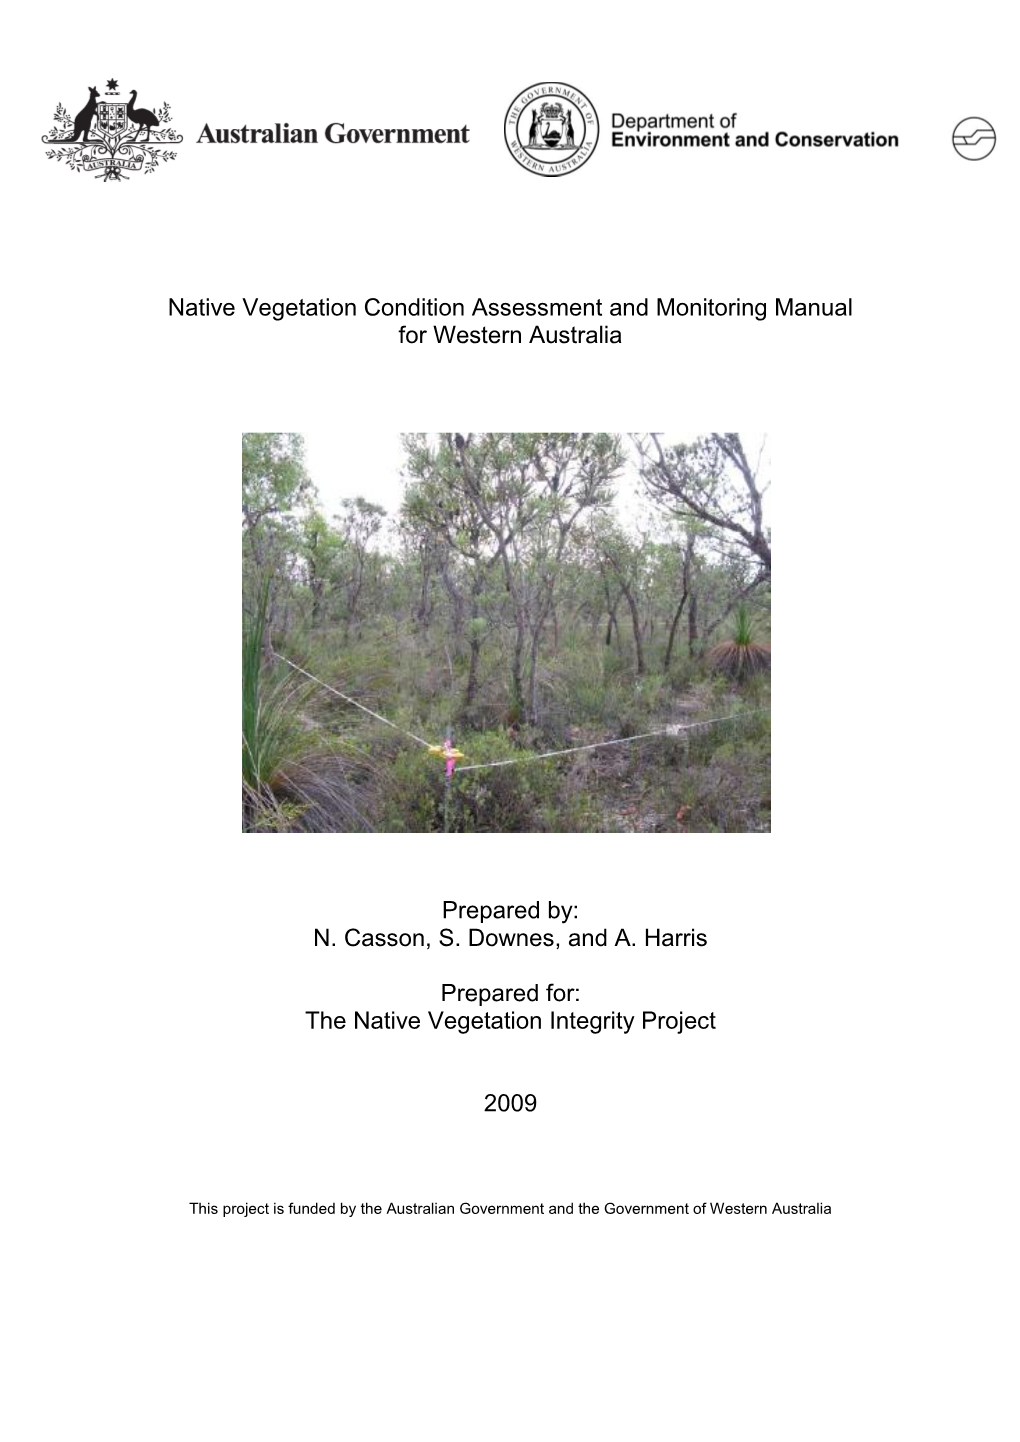 Native Vegetation Condition Assessment and Monitoring Manual for Western Australia